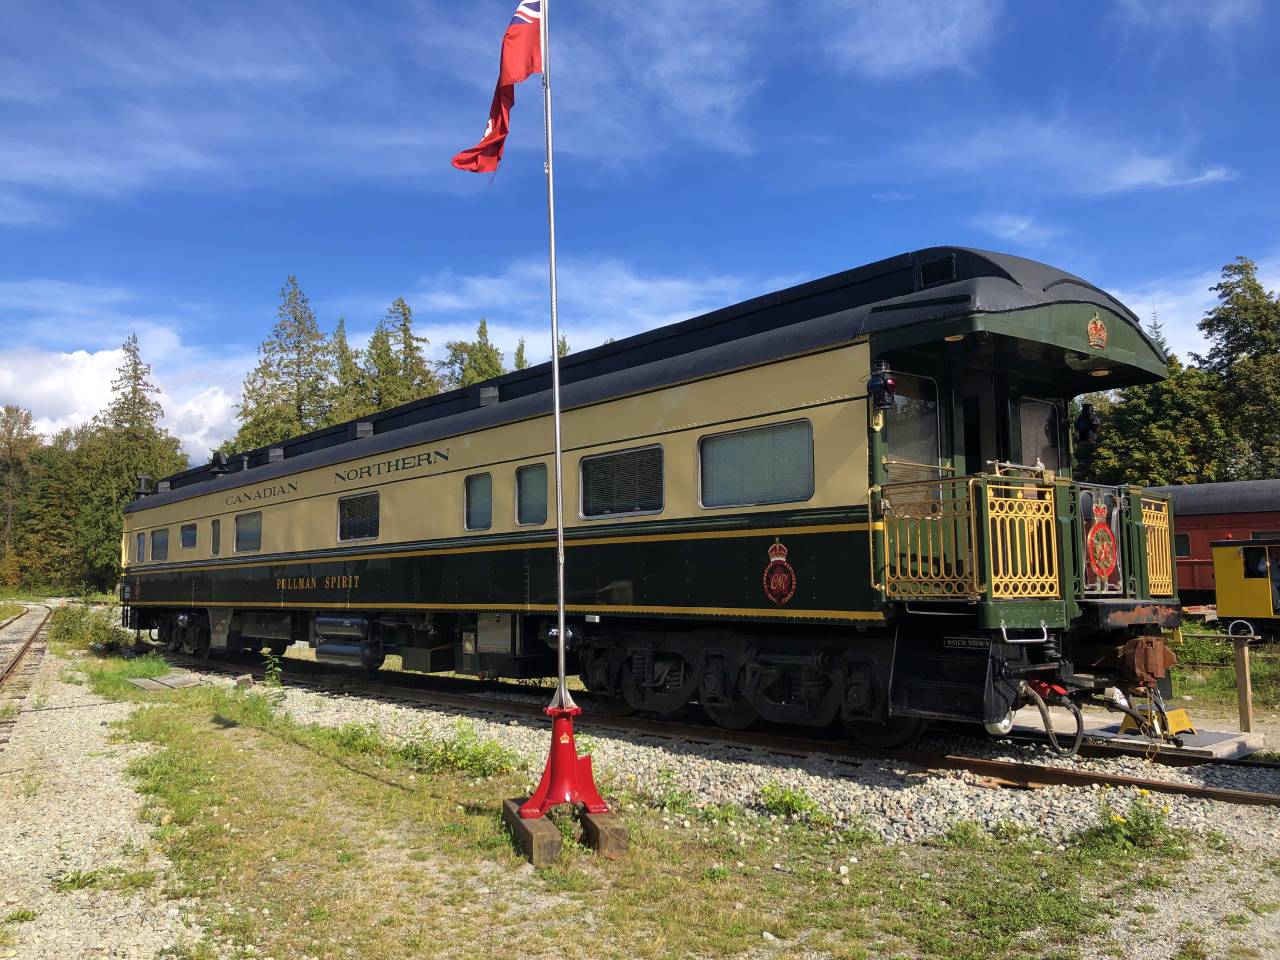 Read more about the article Pullman Spirit Observation Car